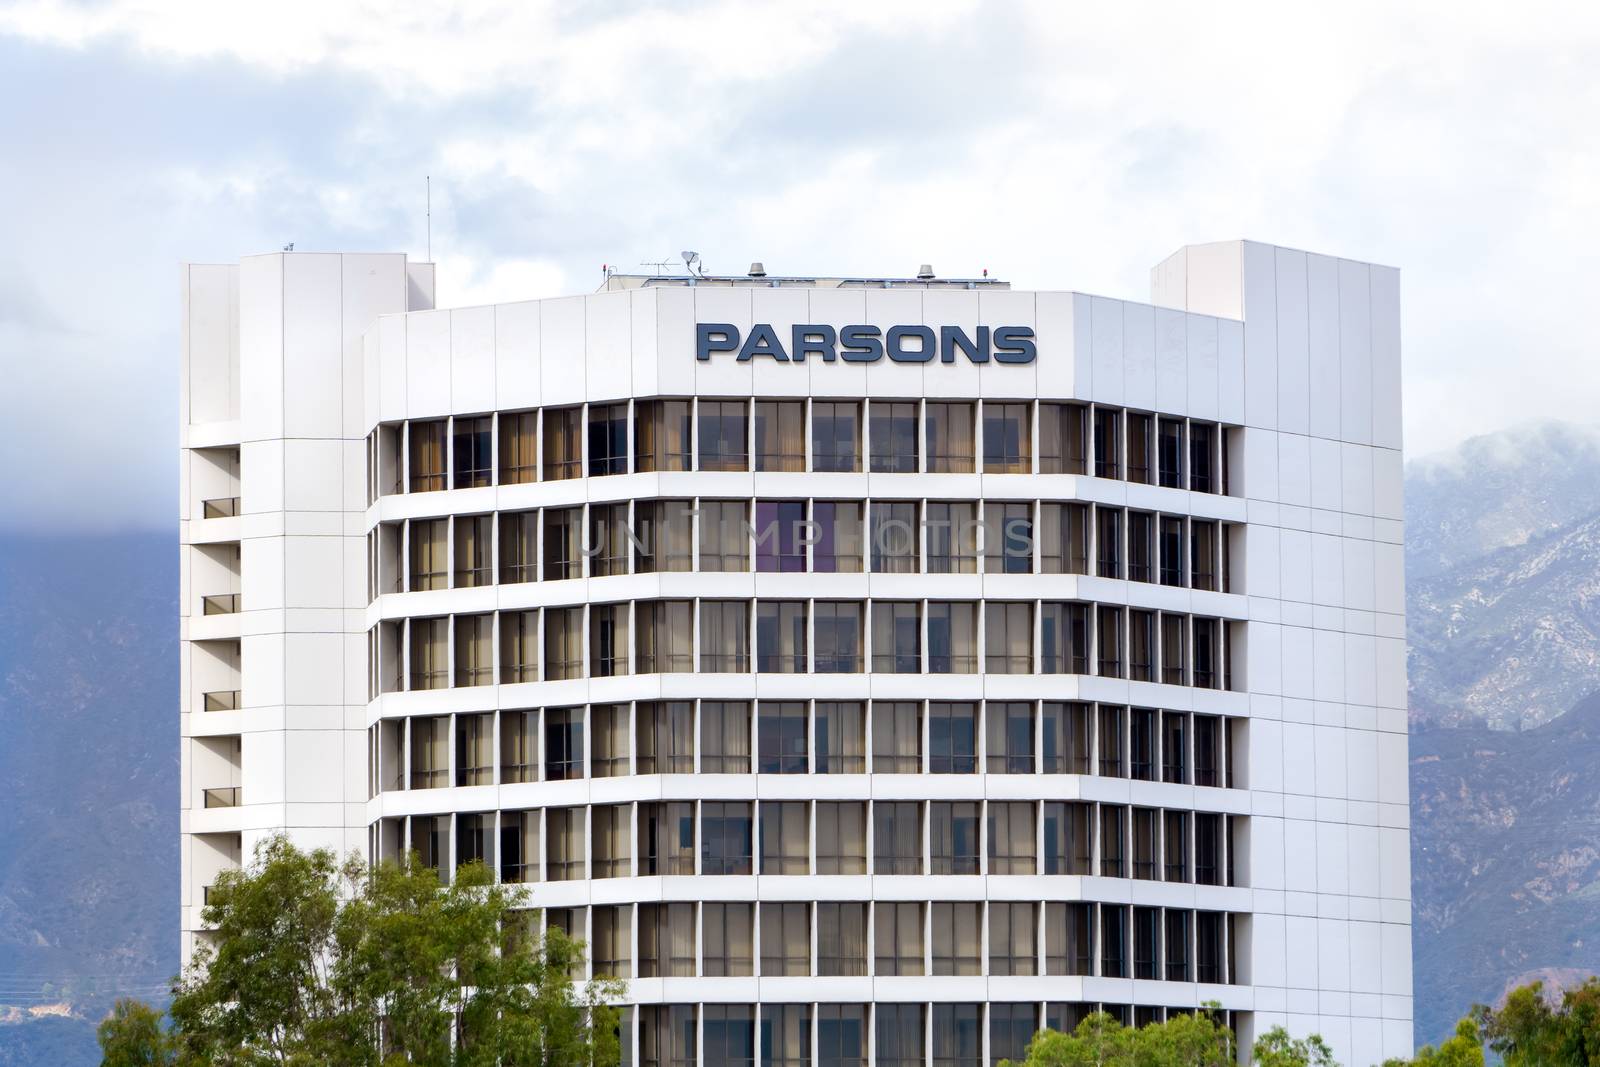 PASADENA, CA/USA - OCTOBER 4, 2015: Parsons Corporation corporate Headquarters. Parsons is an engineering, construction, technical, and management services firm.